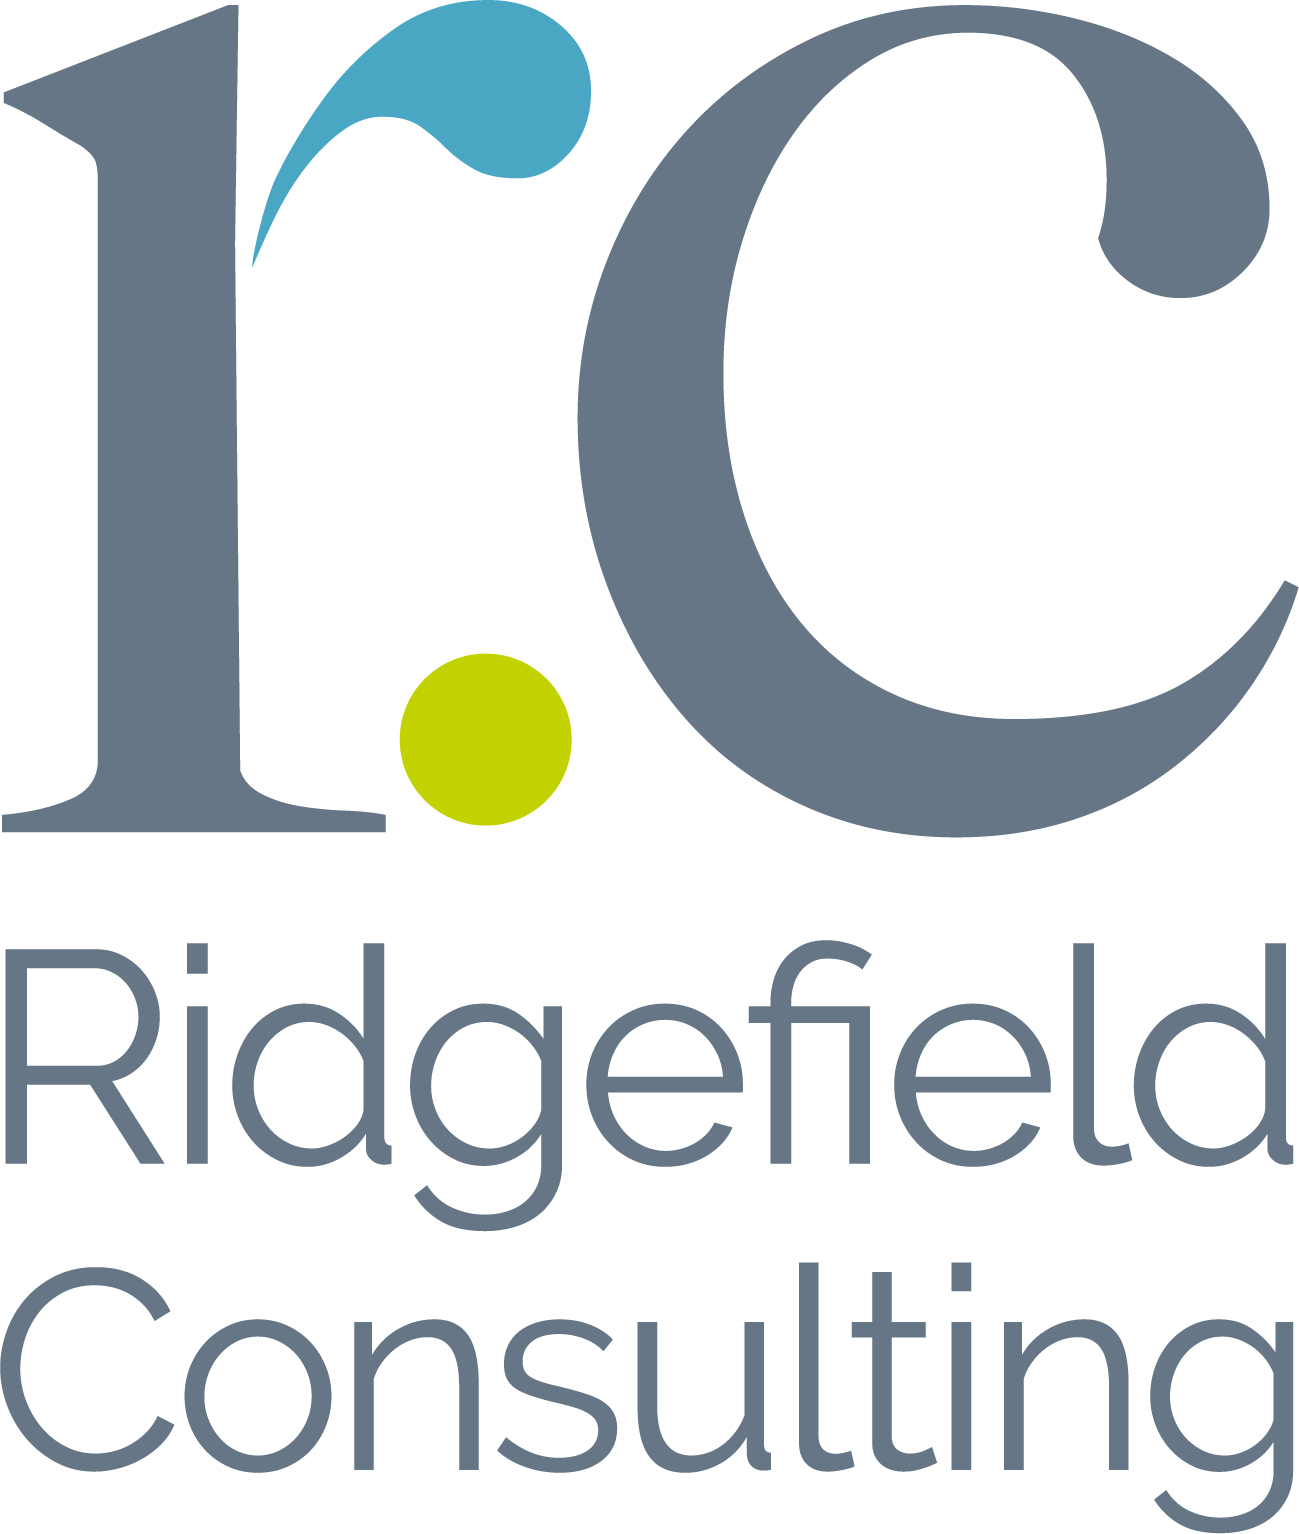 Ridgefield Consulting Limited logo